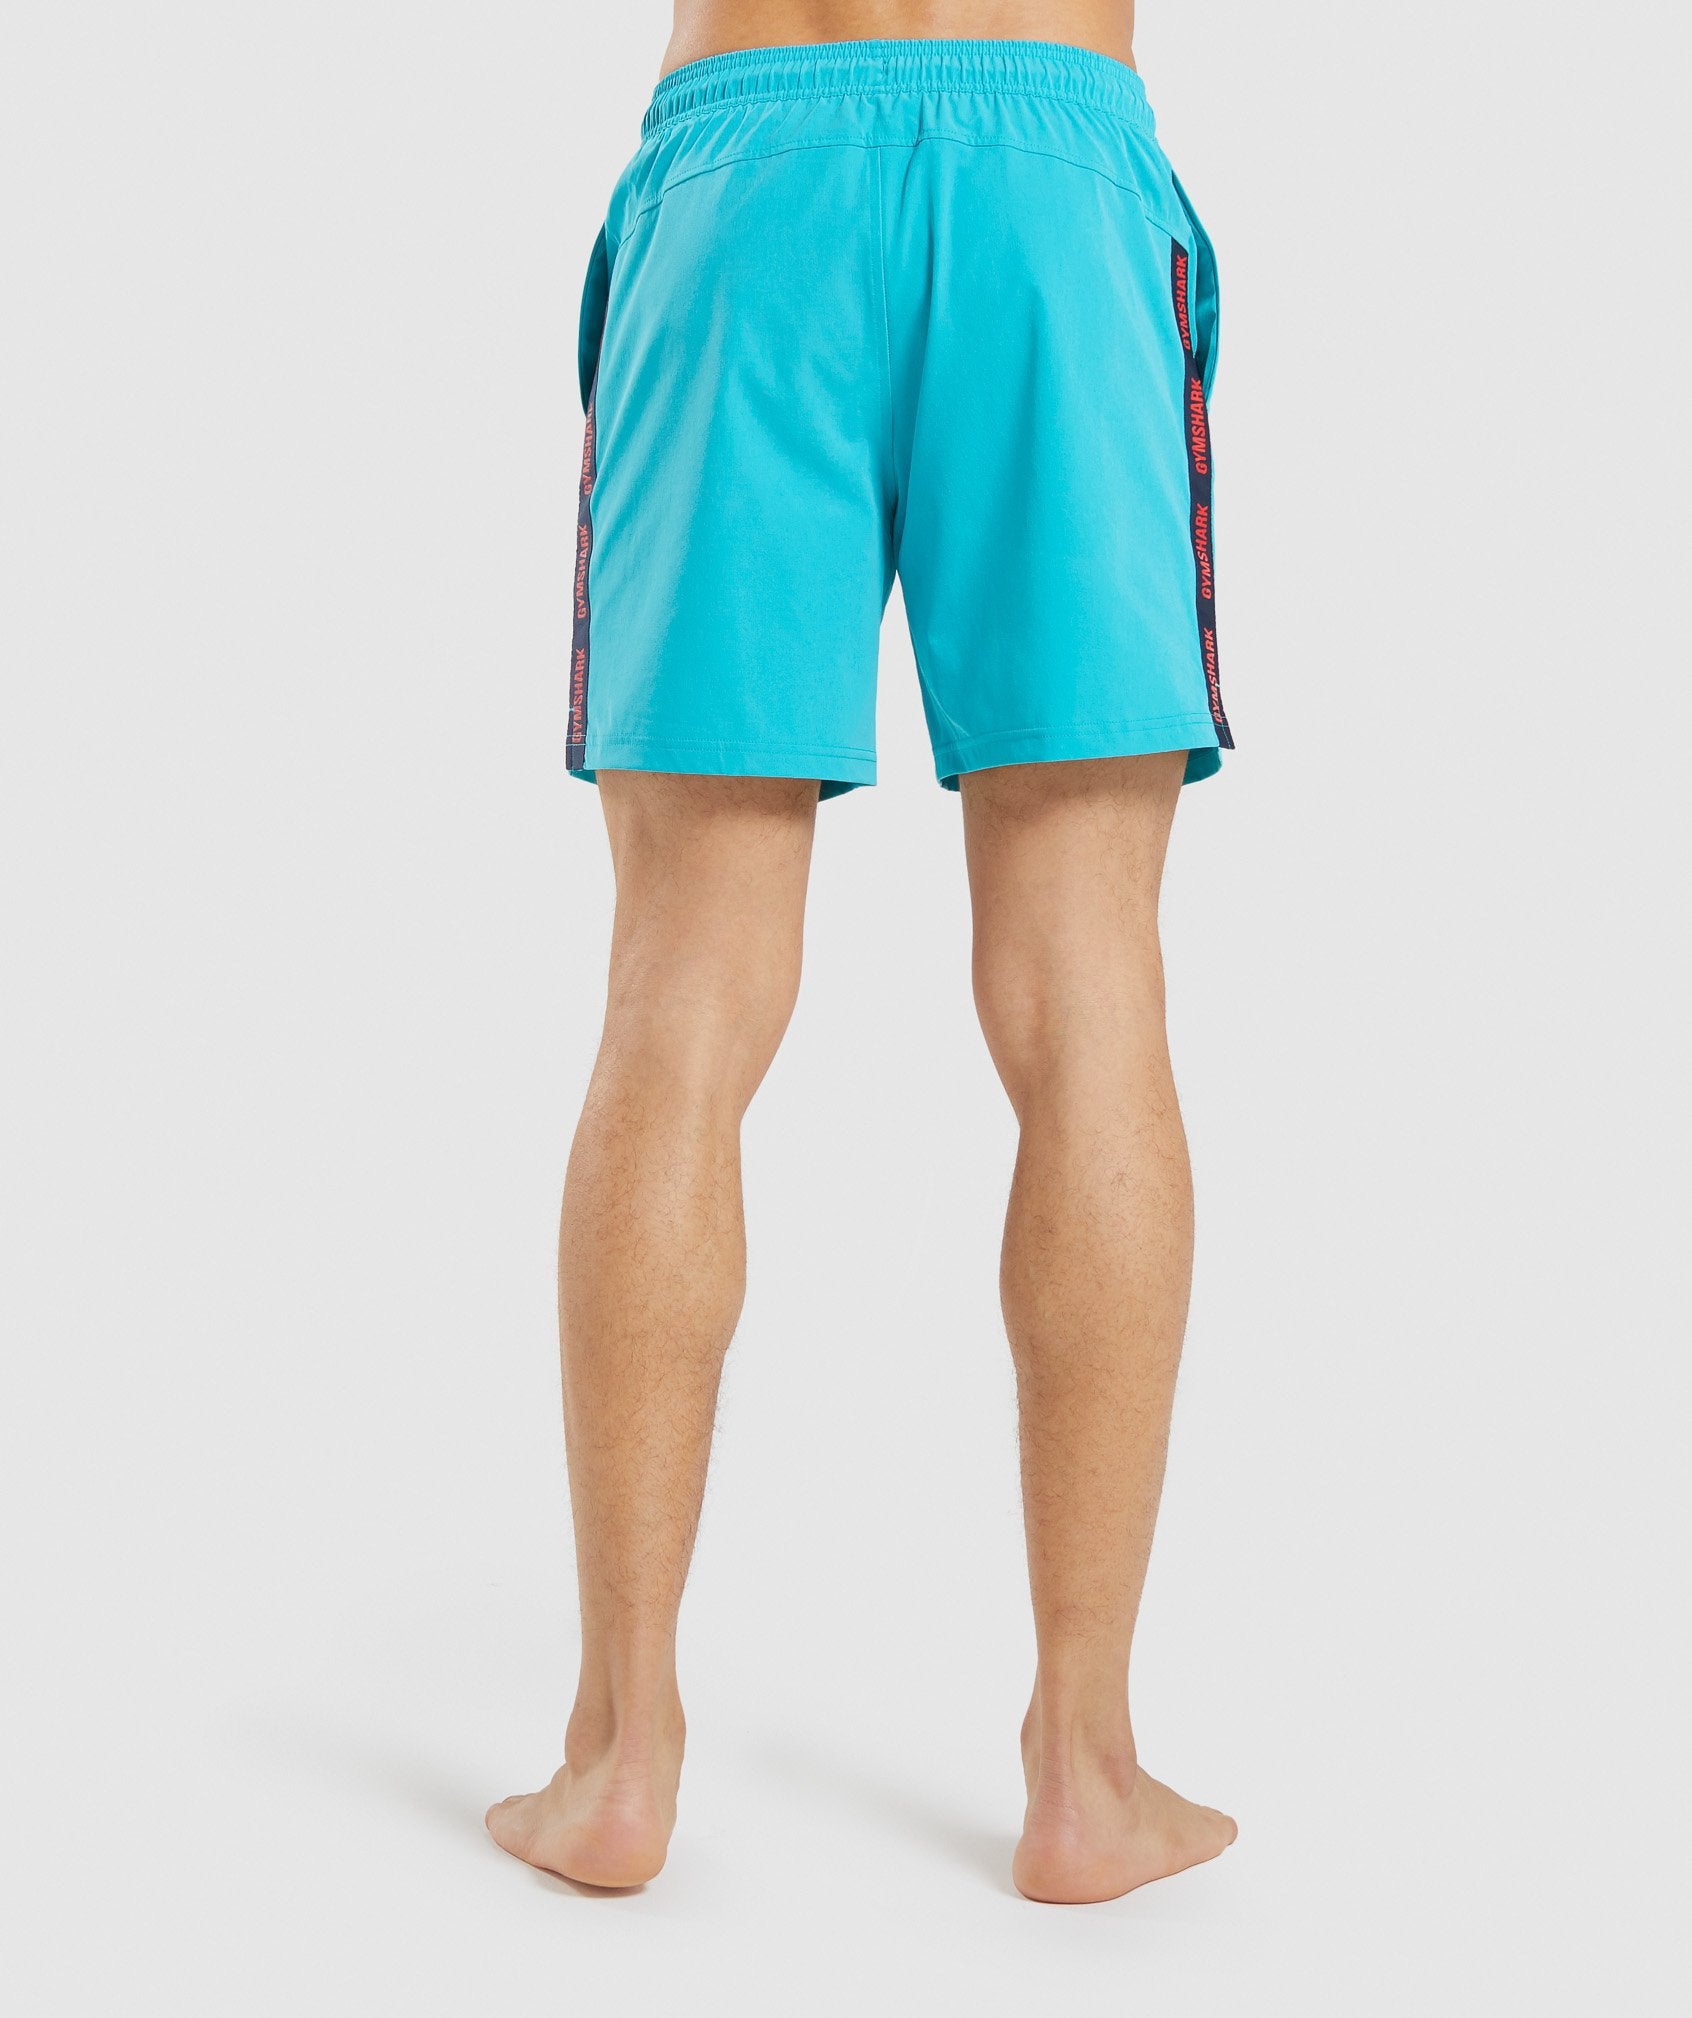 Taped Swim Shorts in Teal